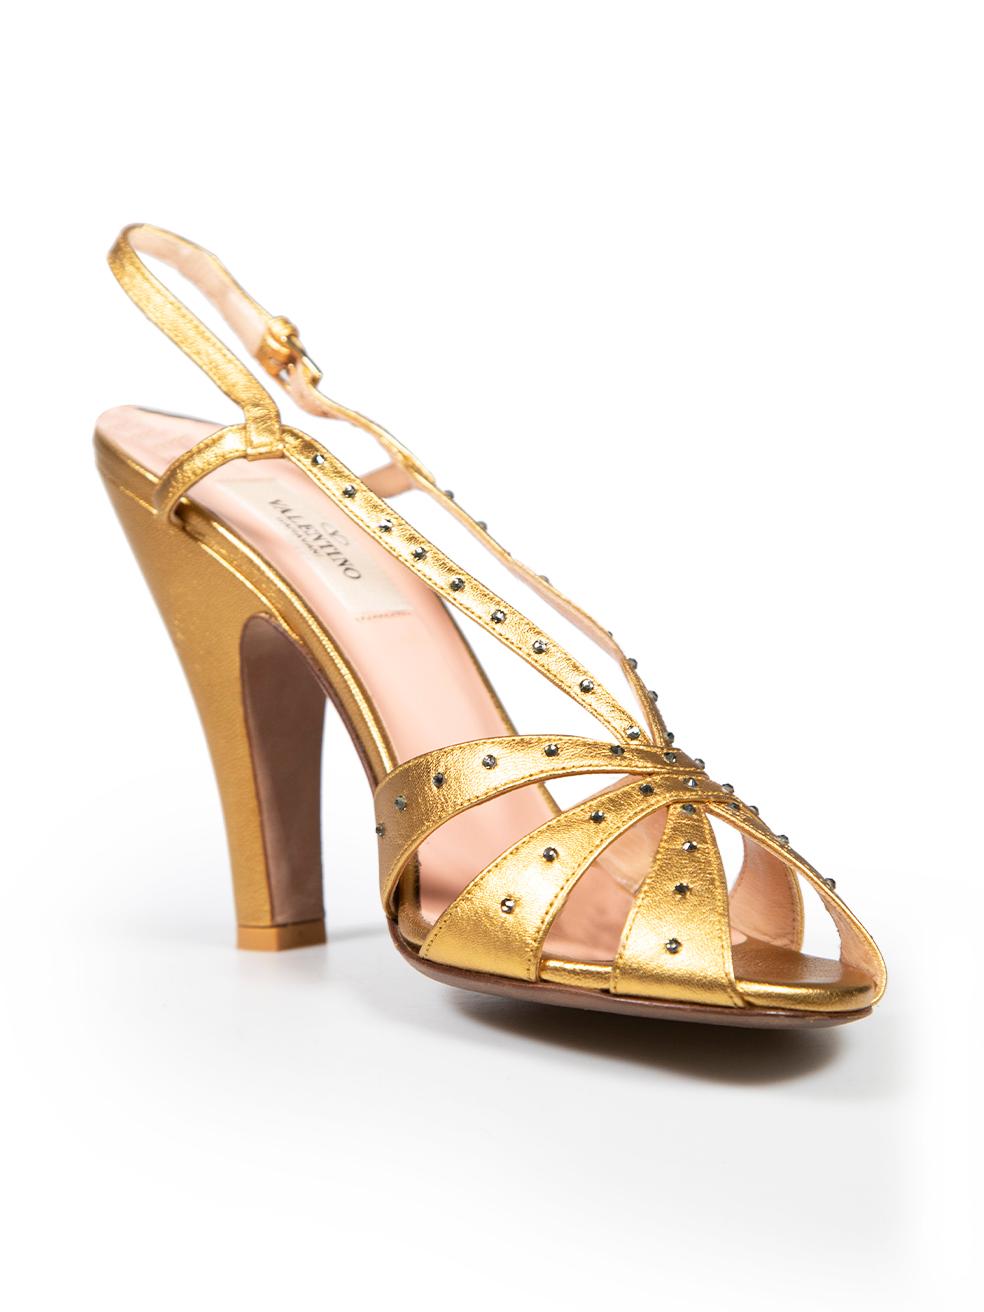 CONDITION is Very good. Minimal wear to heels is evident. Minimal wear to the outsoles where mild abrasion can be seen on this used Valentino designer resale item. Comes in original box with dust bag.
 
 
 
 Details
 
 
 Gold
 
 Leather
 
 Sandals
